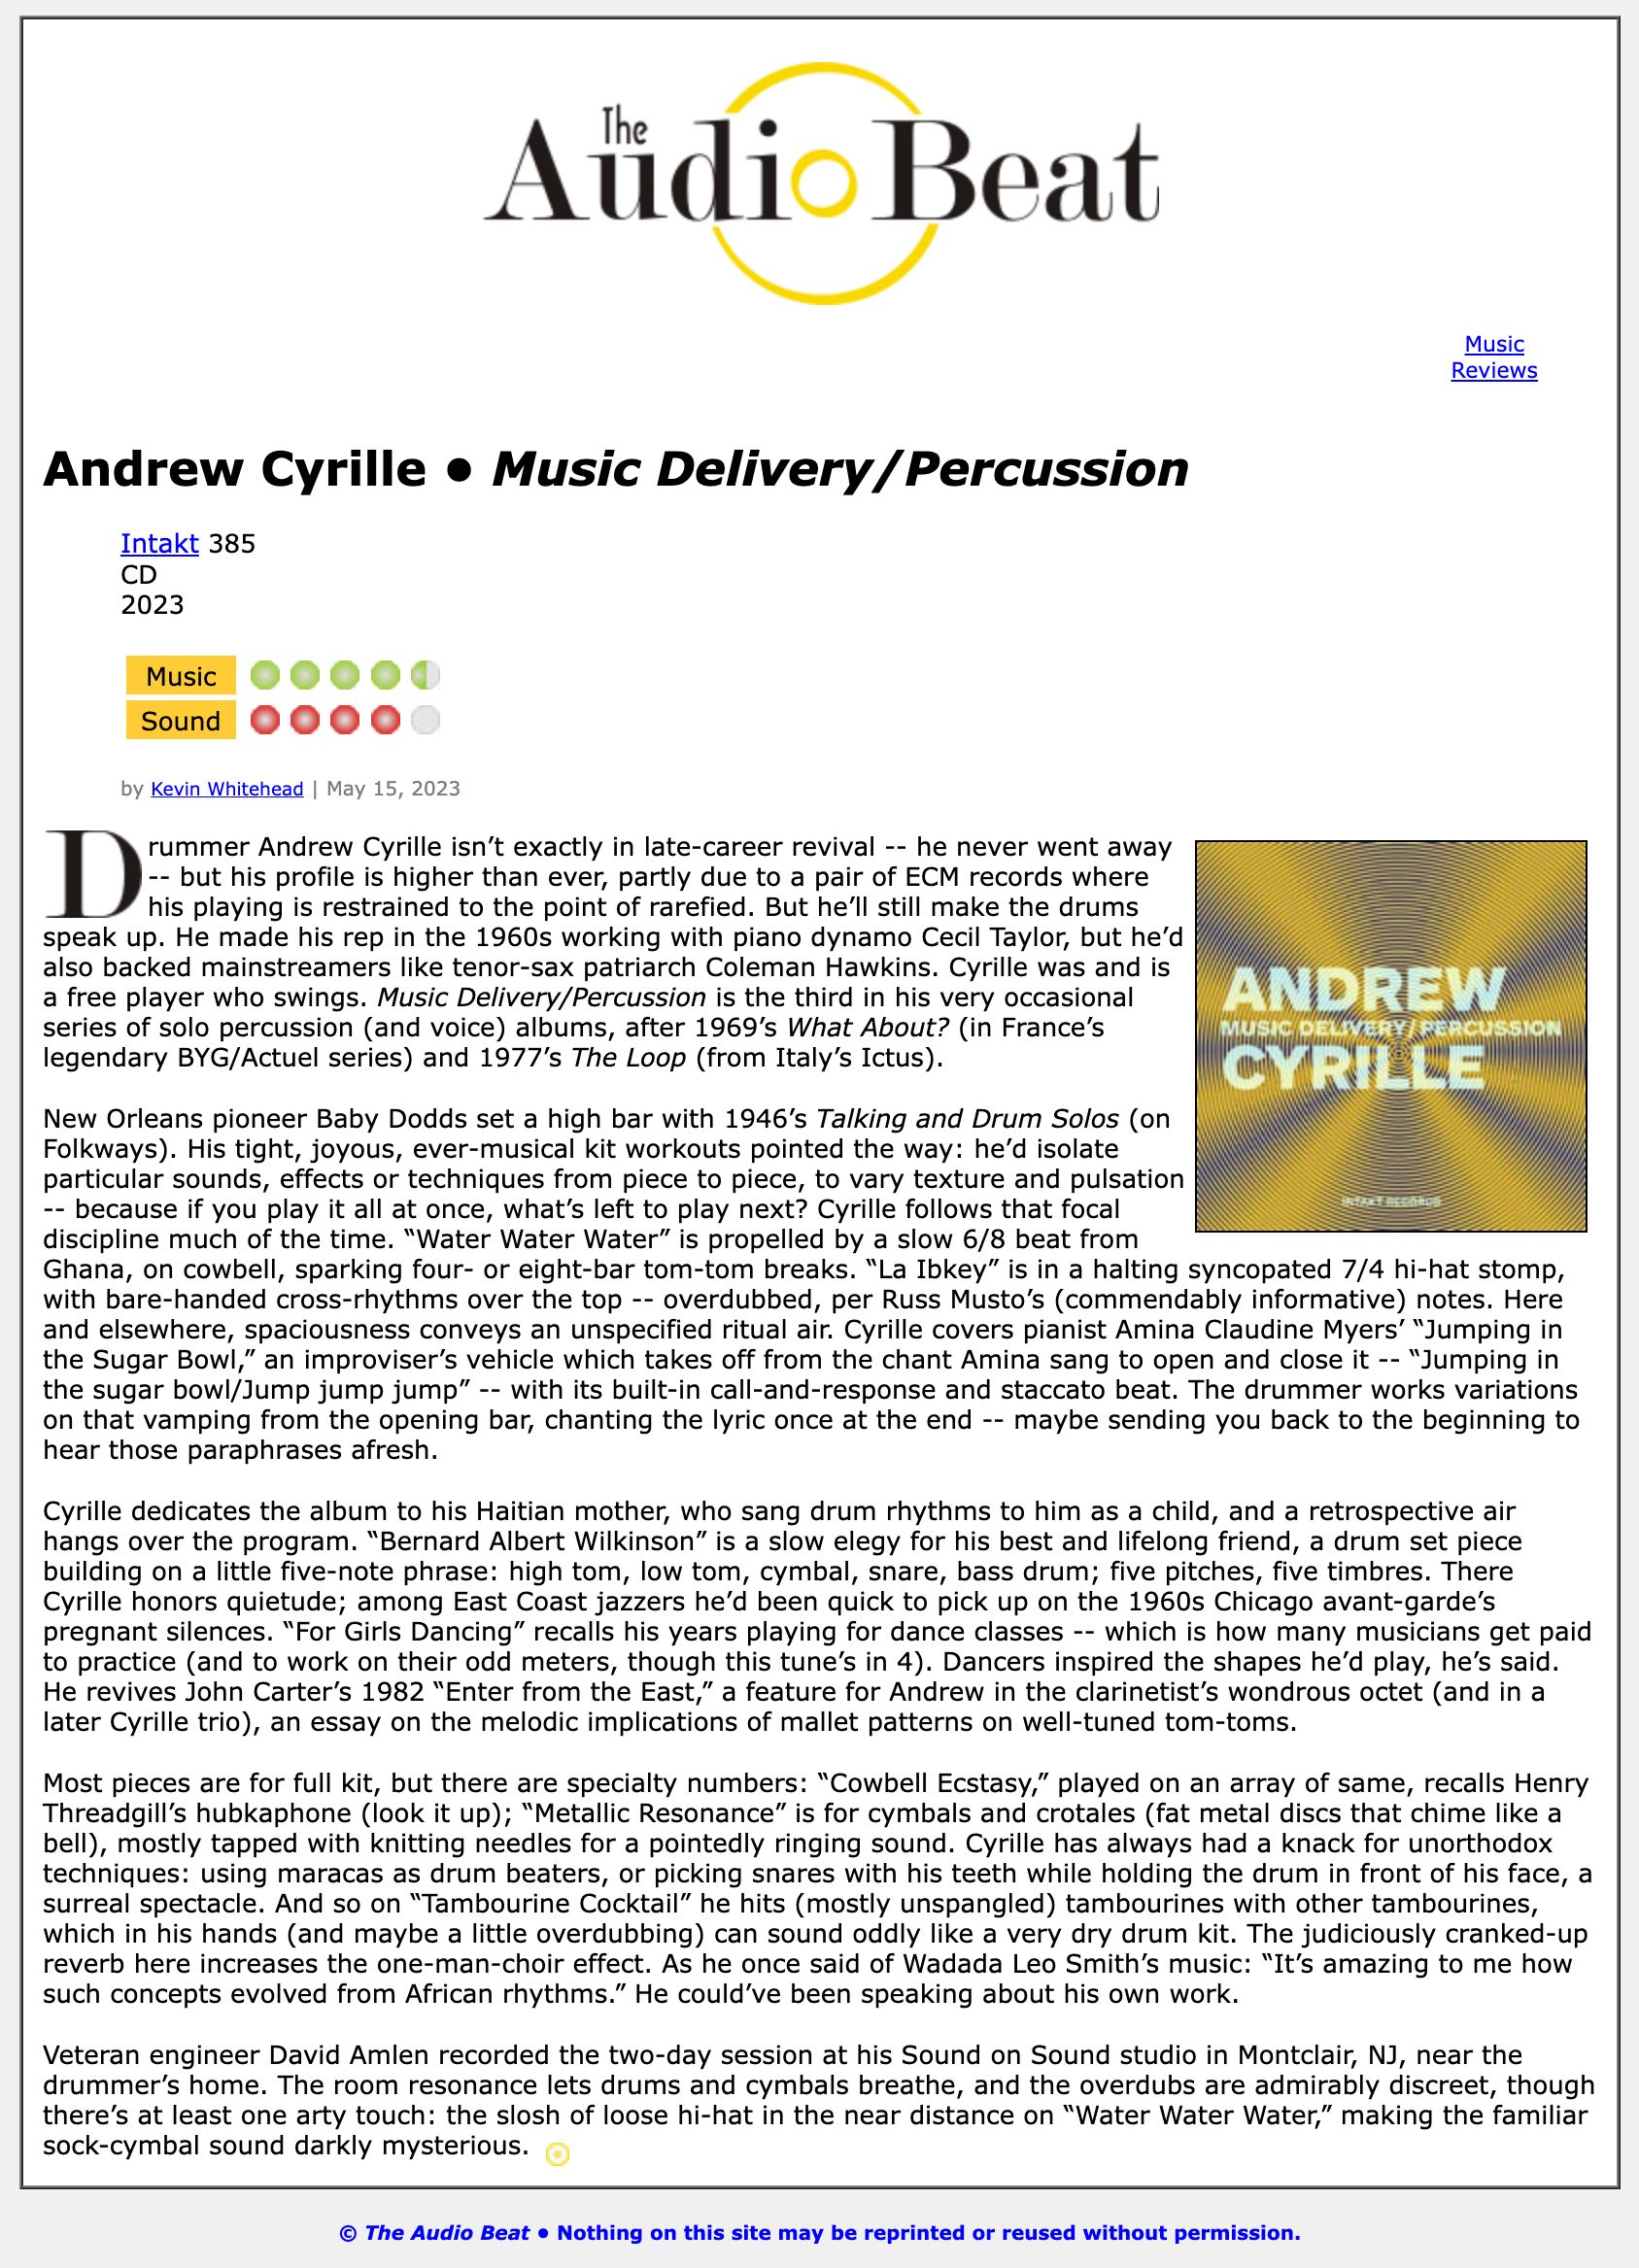 Drummer Andrew Cyrille isn’t exactly in late-career revival -- he never went away -- but his profile is higher than ever, partly due to a pair of ECM records where his playing is restrained to the point of rarefied. But he’ll still make the drums speak up. He made his rep in the 1960s working with piano dynamo Cecil Taylor, but he’d also backed mainstreamers like tenor-sax patriarch Coleman Hawkins. Cyrille was and is a free player who swings. Music Delivery/Percussion is the third in his very occasional series of solo percussion (and voice) albums, after 1969’s What About? (in France’s legendary BYG/Actuel series) and 1977’s The Loop (from Italy’s Ictus).